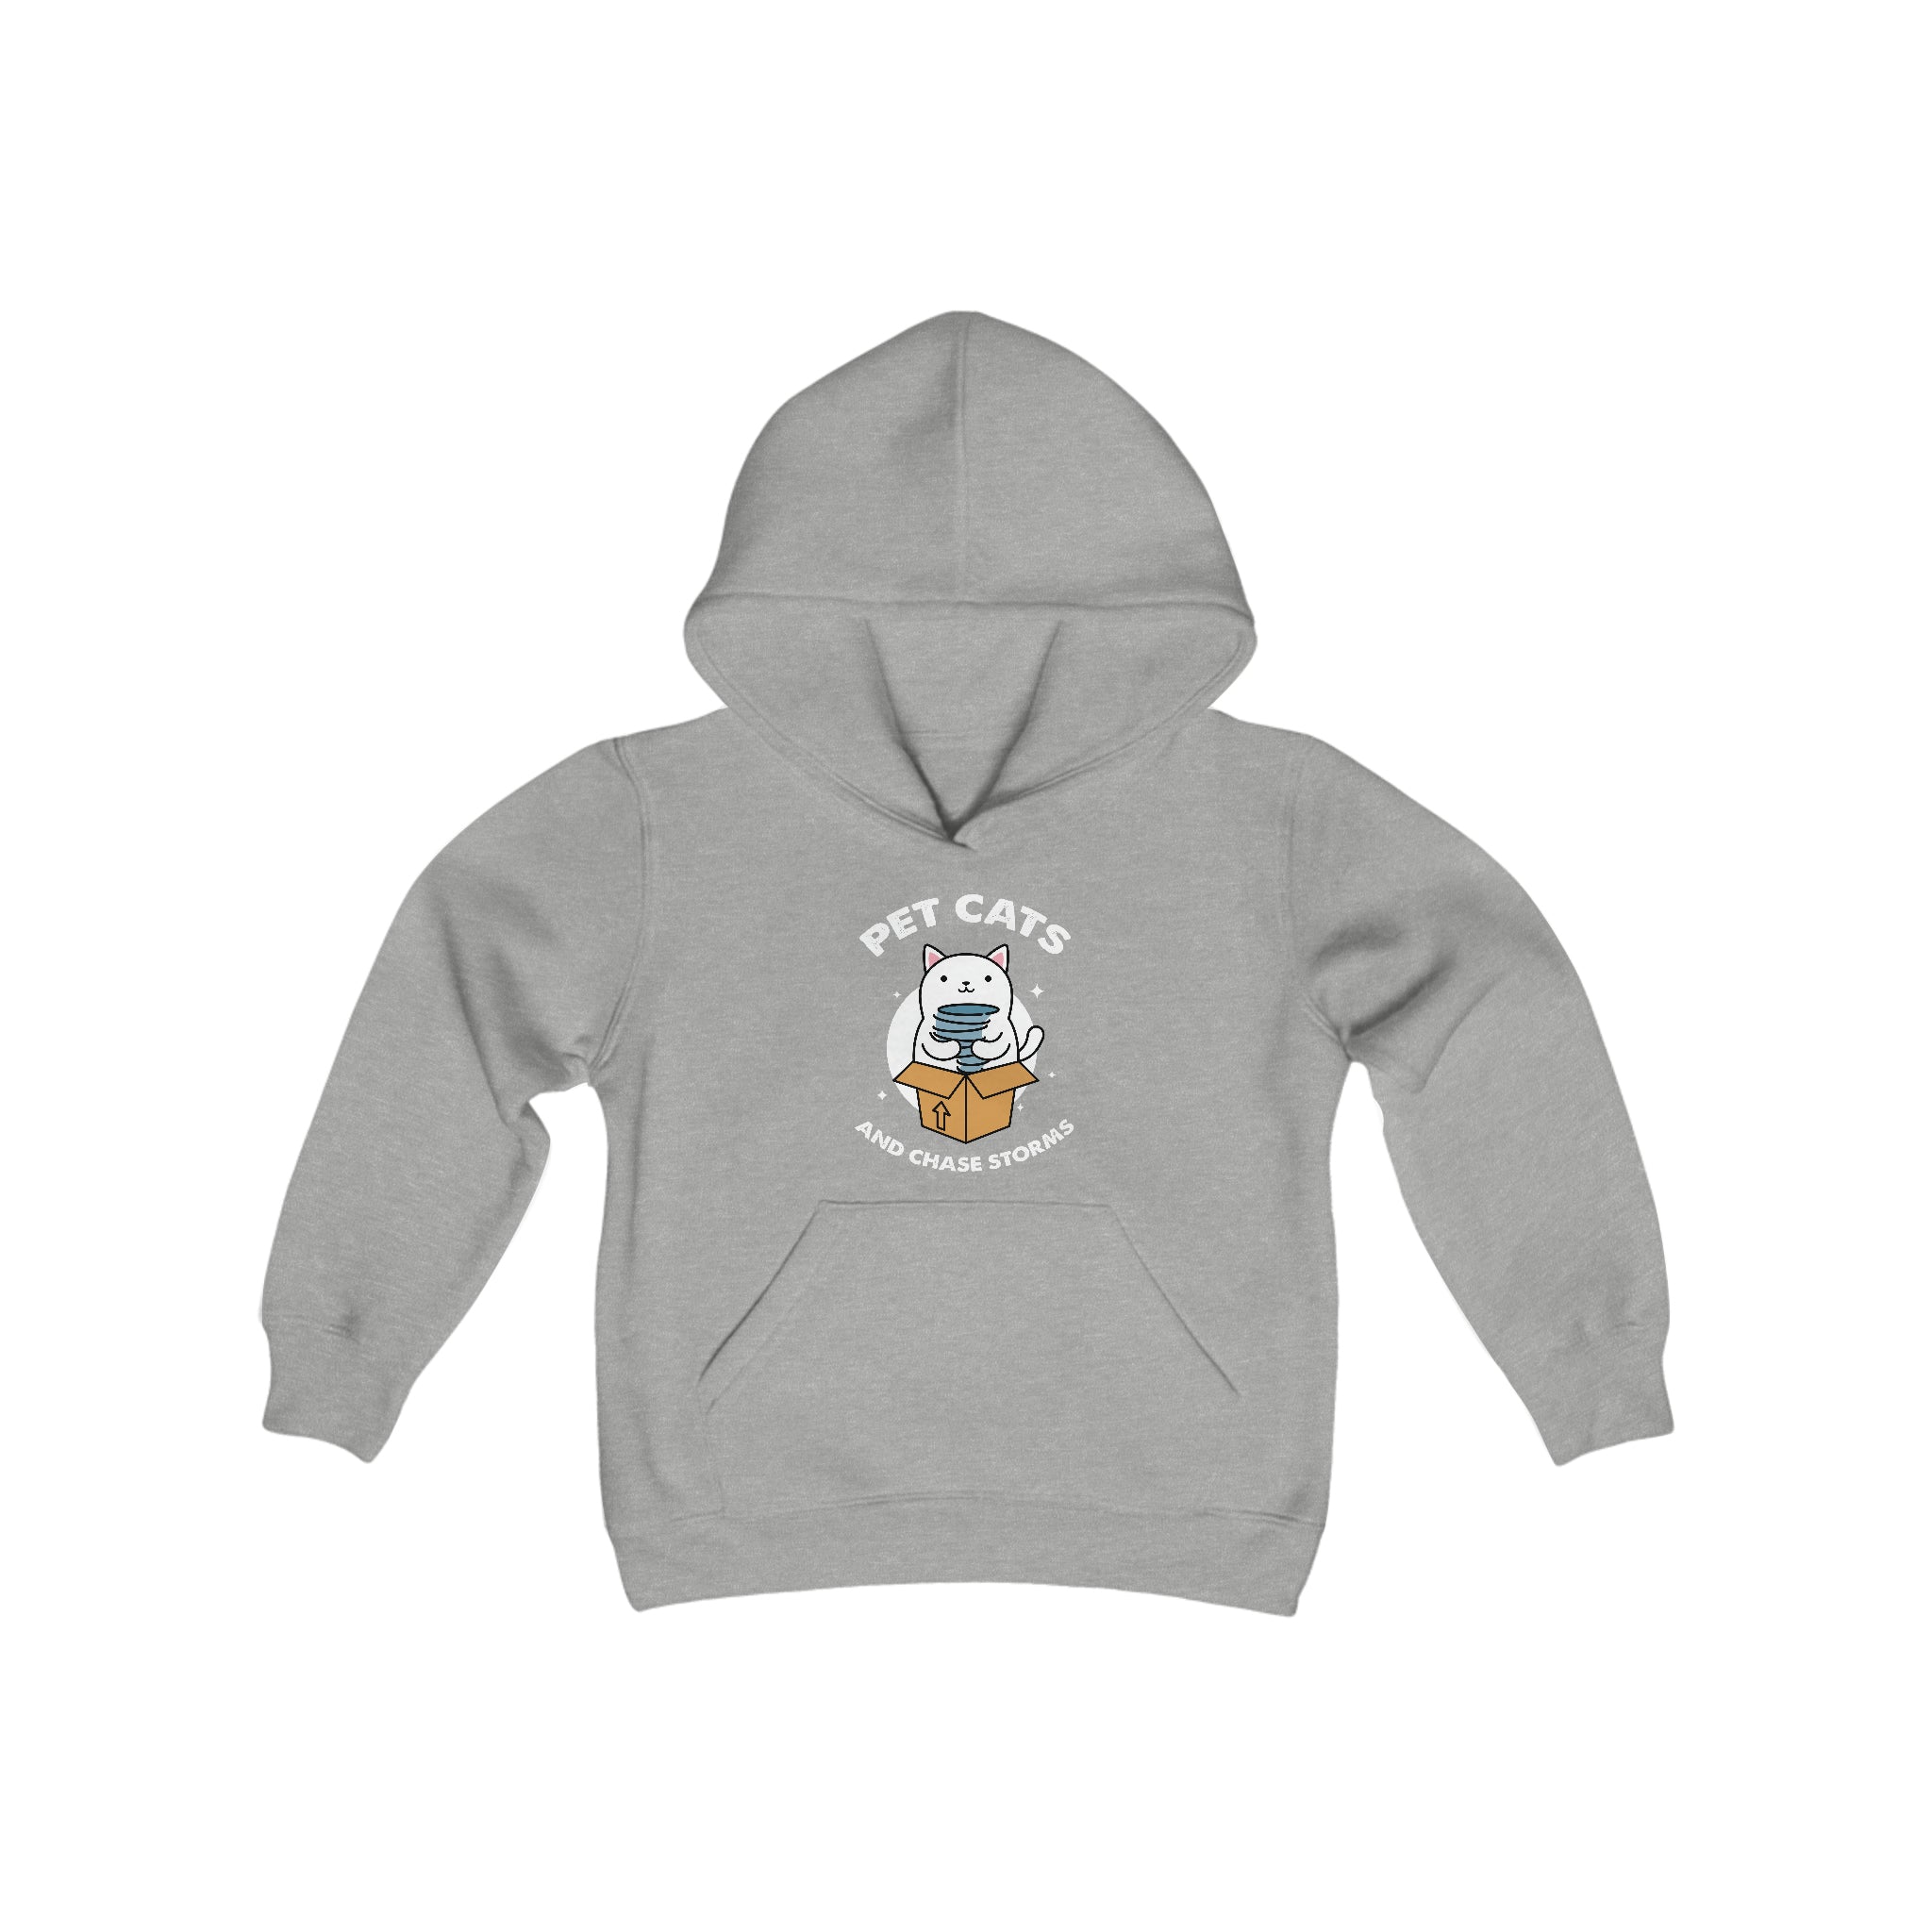 Pet Cats and Chase Storms Children's Hoodie 